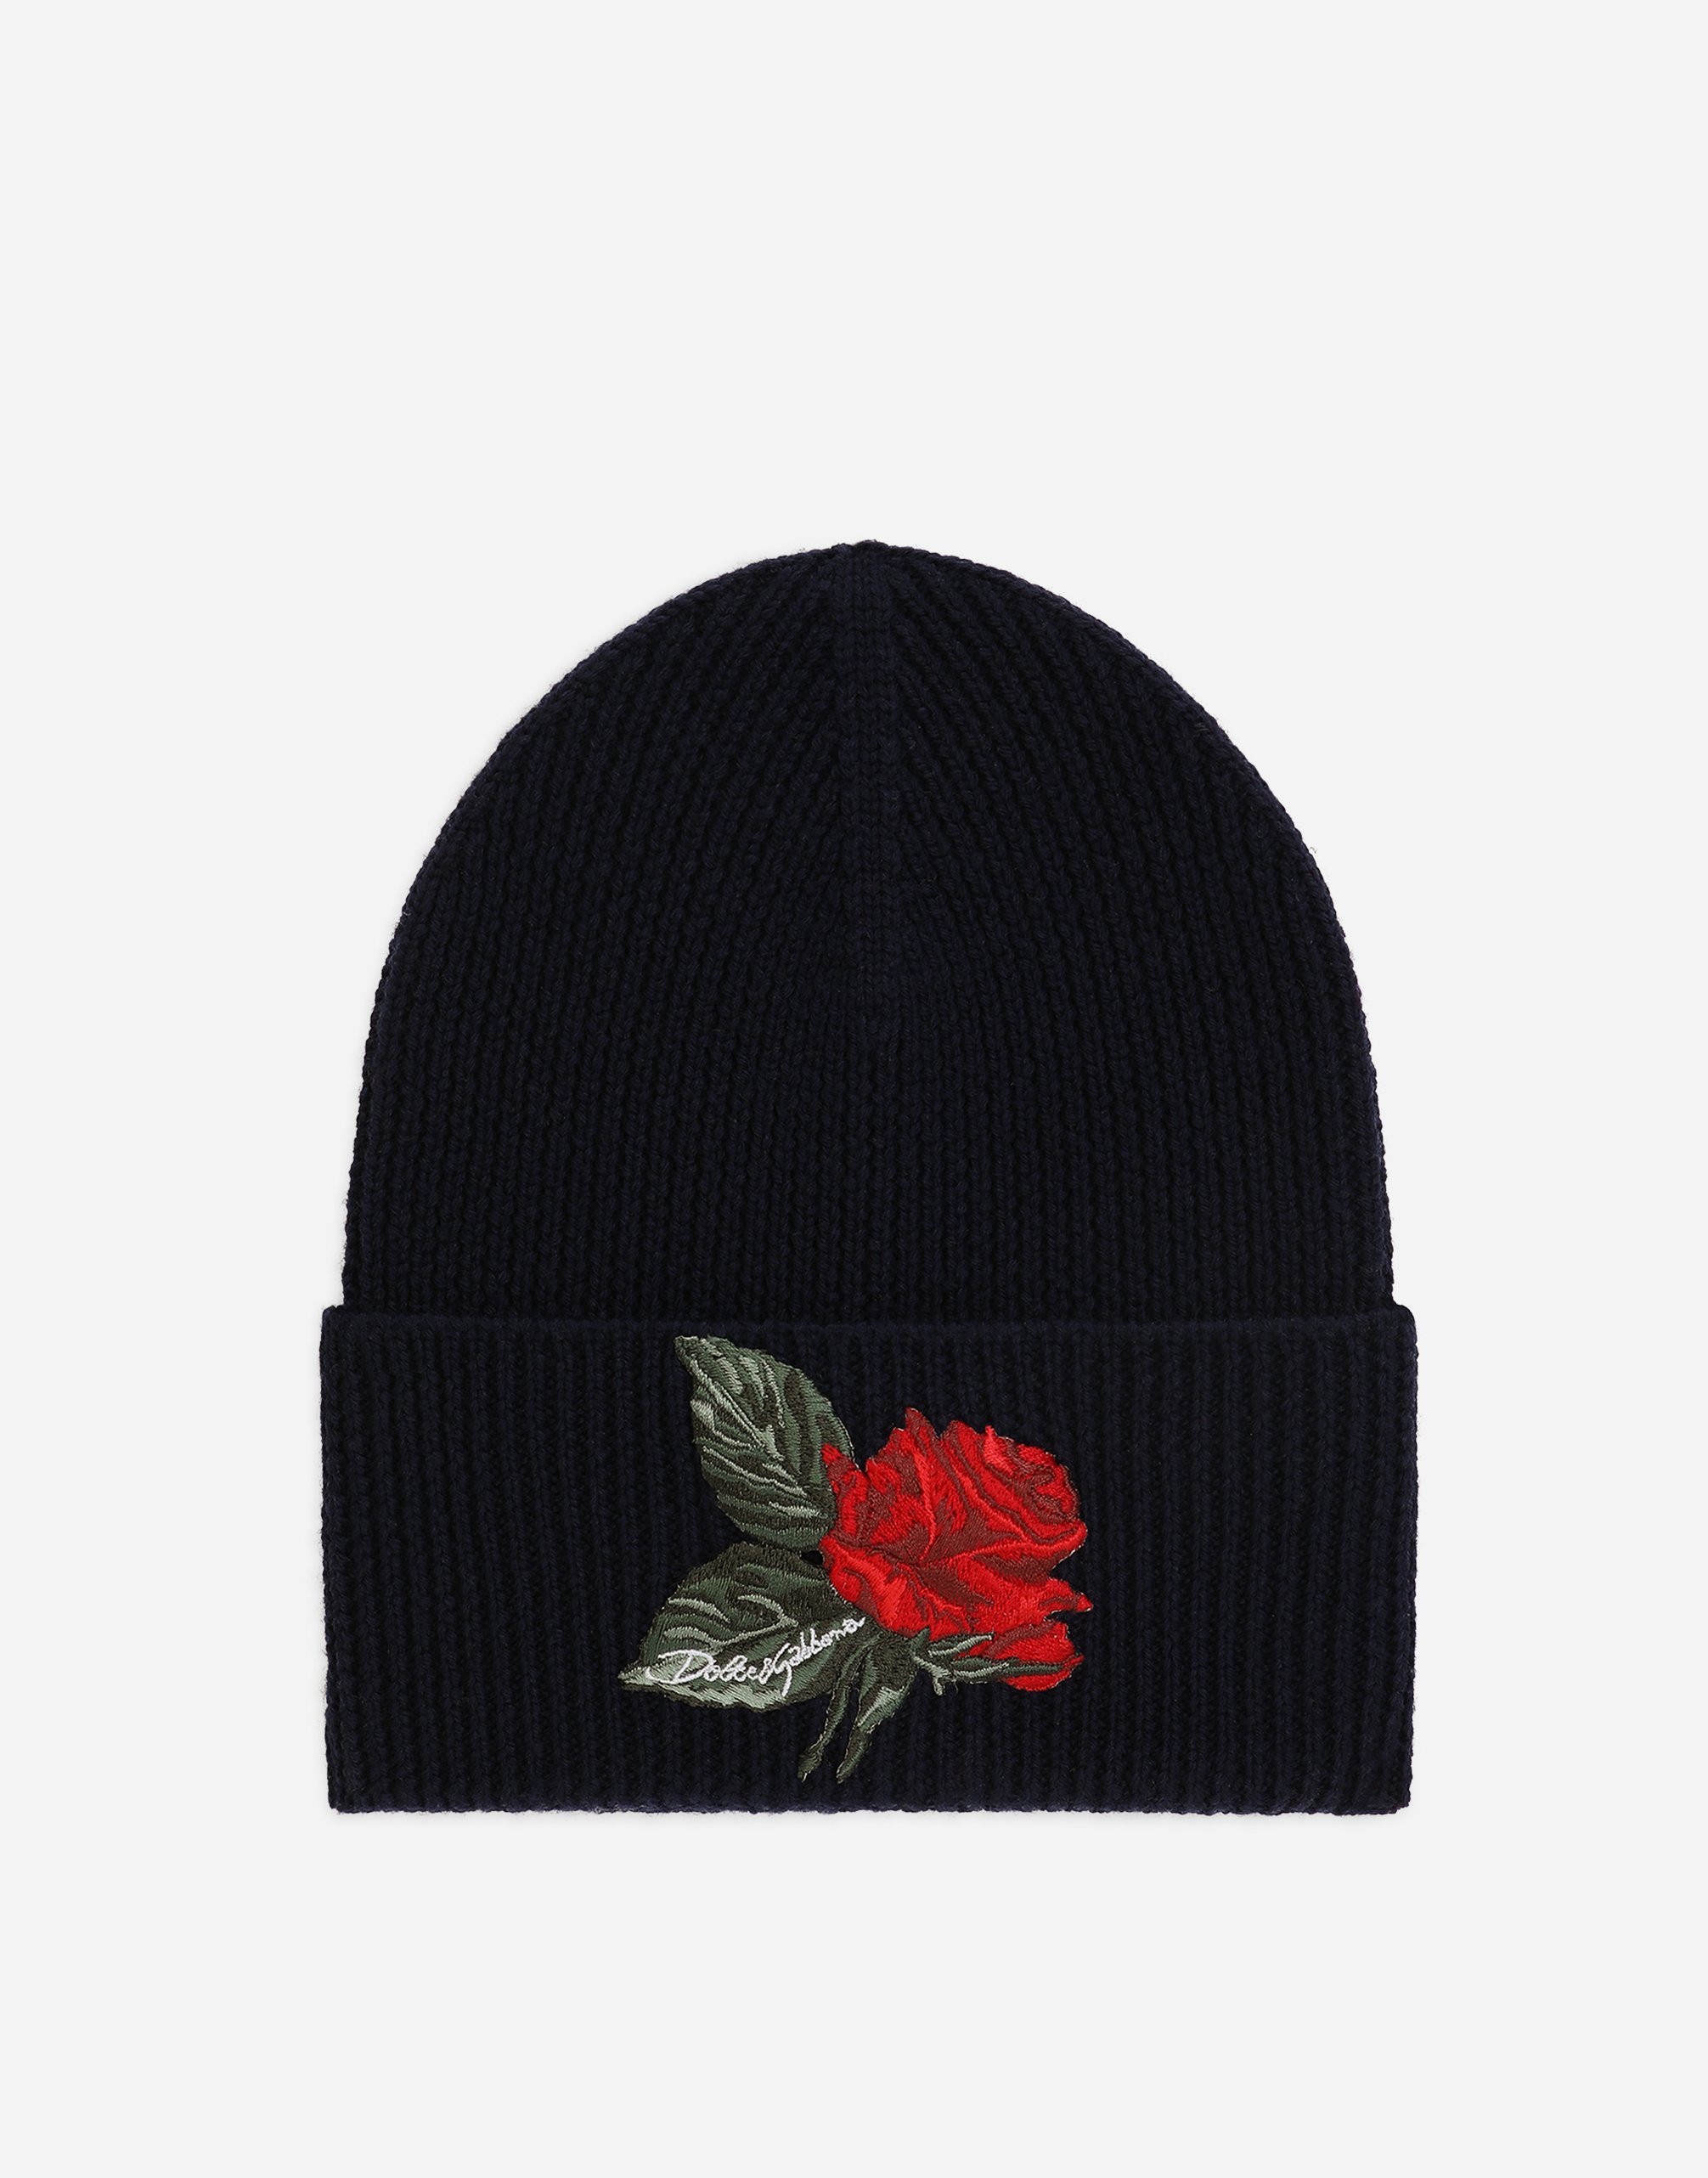 DOLCE & GABBANA RIBBED KNIT HAT WITH ROSE PATCH